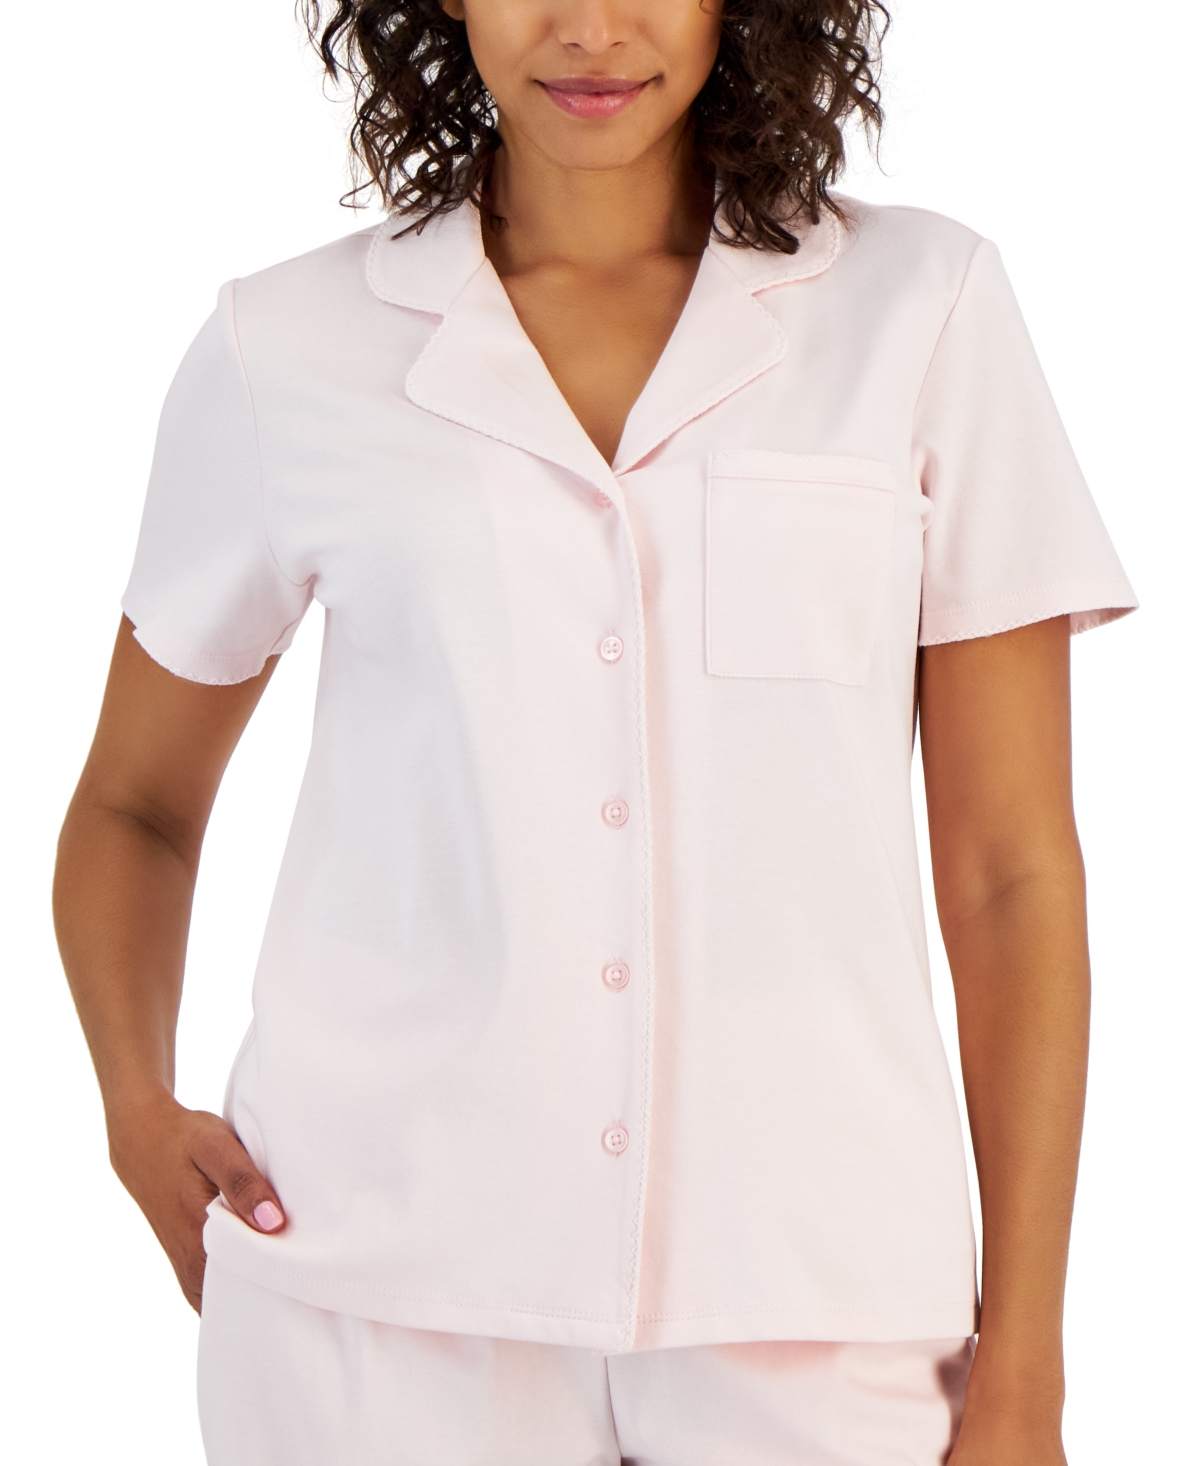 Women's Solid V-Neck Short-Sleeve Sleepwear Top, Created for Macy's